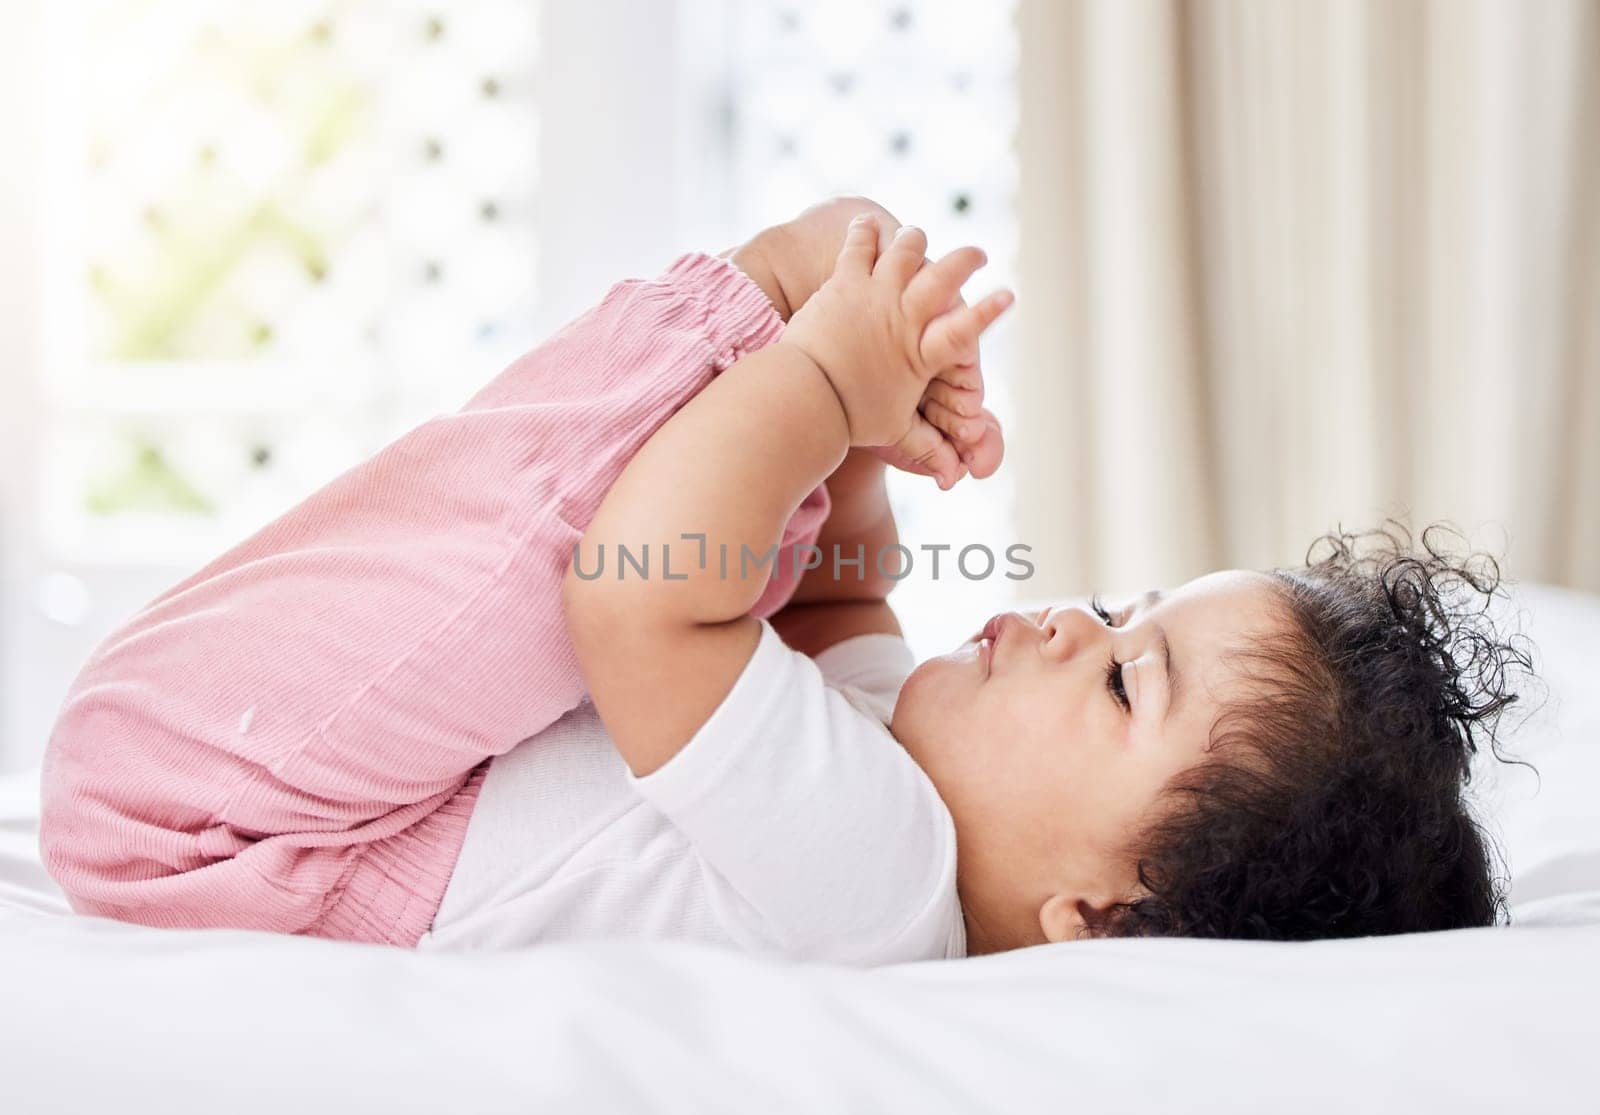 Baby, feet and hands with curiosity in bedroom for motor skills, growth or development. Little girl, toddler and grab of toes, looking and playing with excitement, discovery and milestone in home.